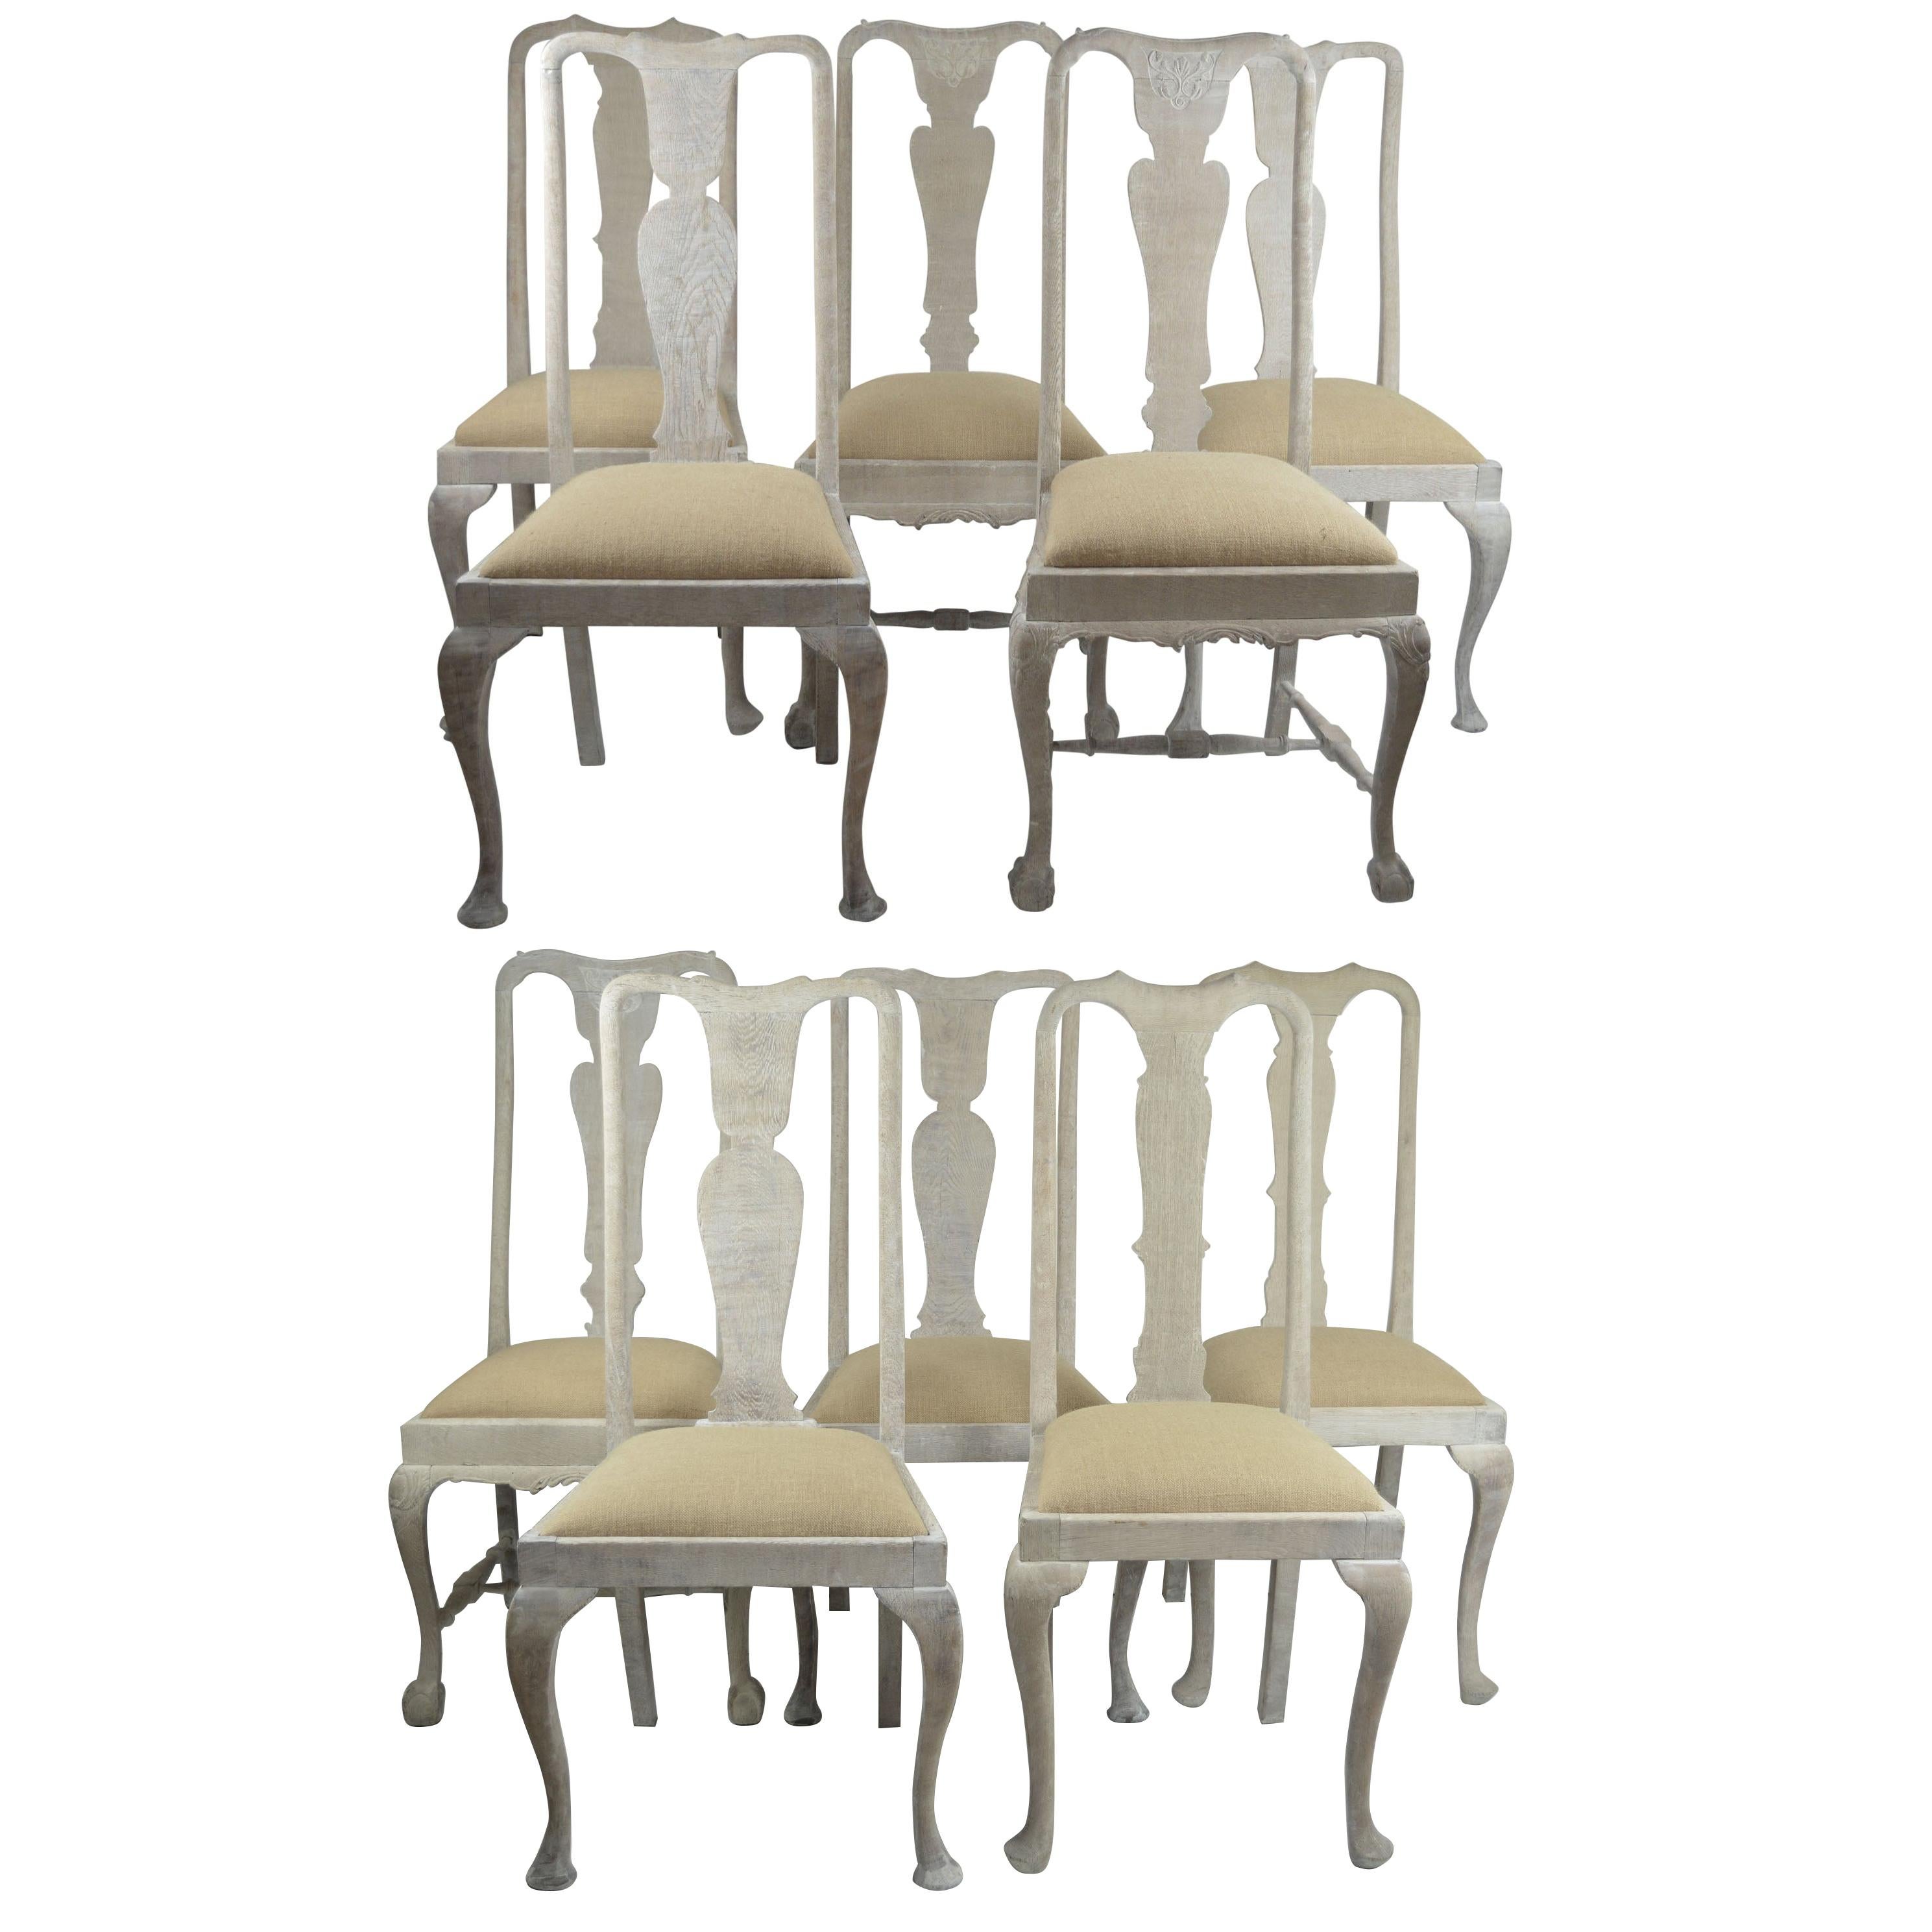 Harlequin Set of 20 Antique Gustavian Style Urn Back Dining Chairs